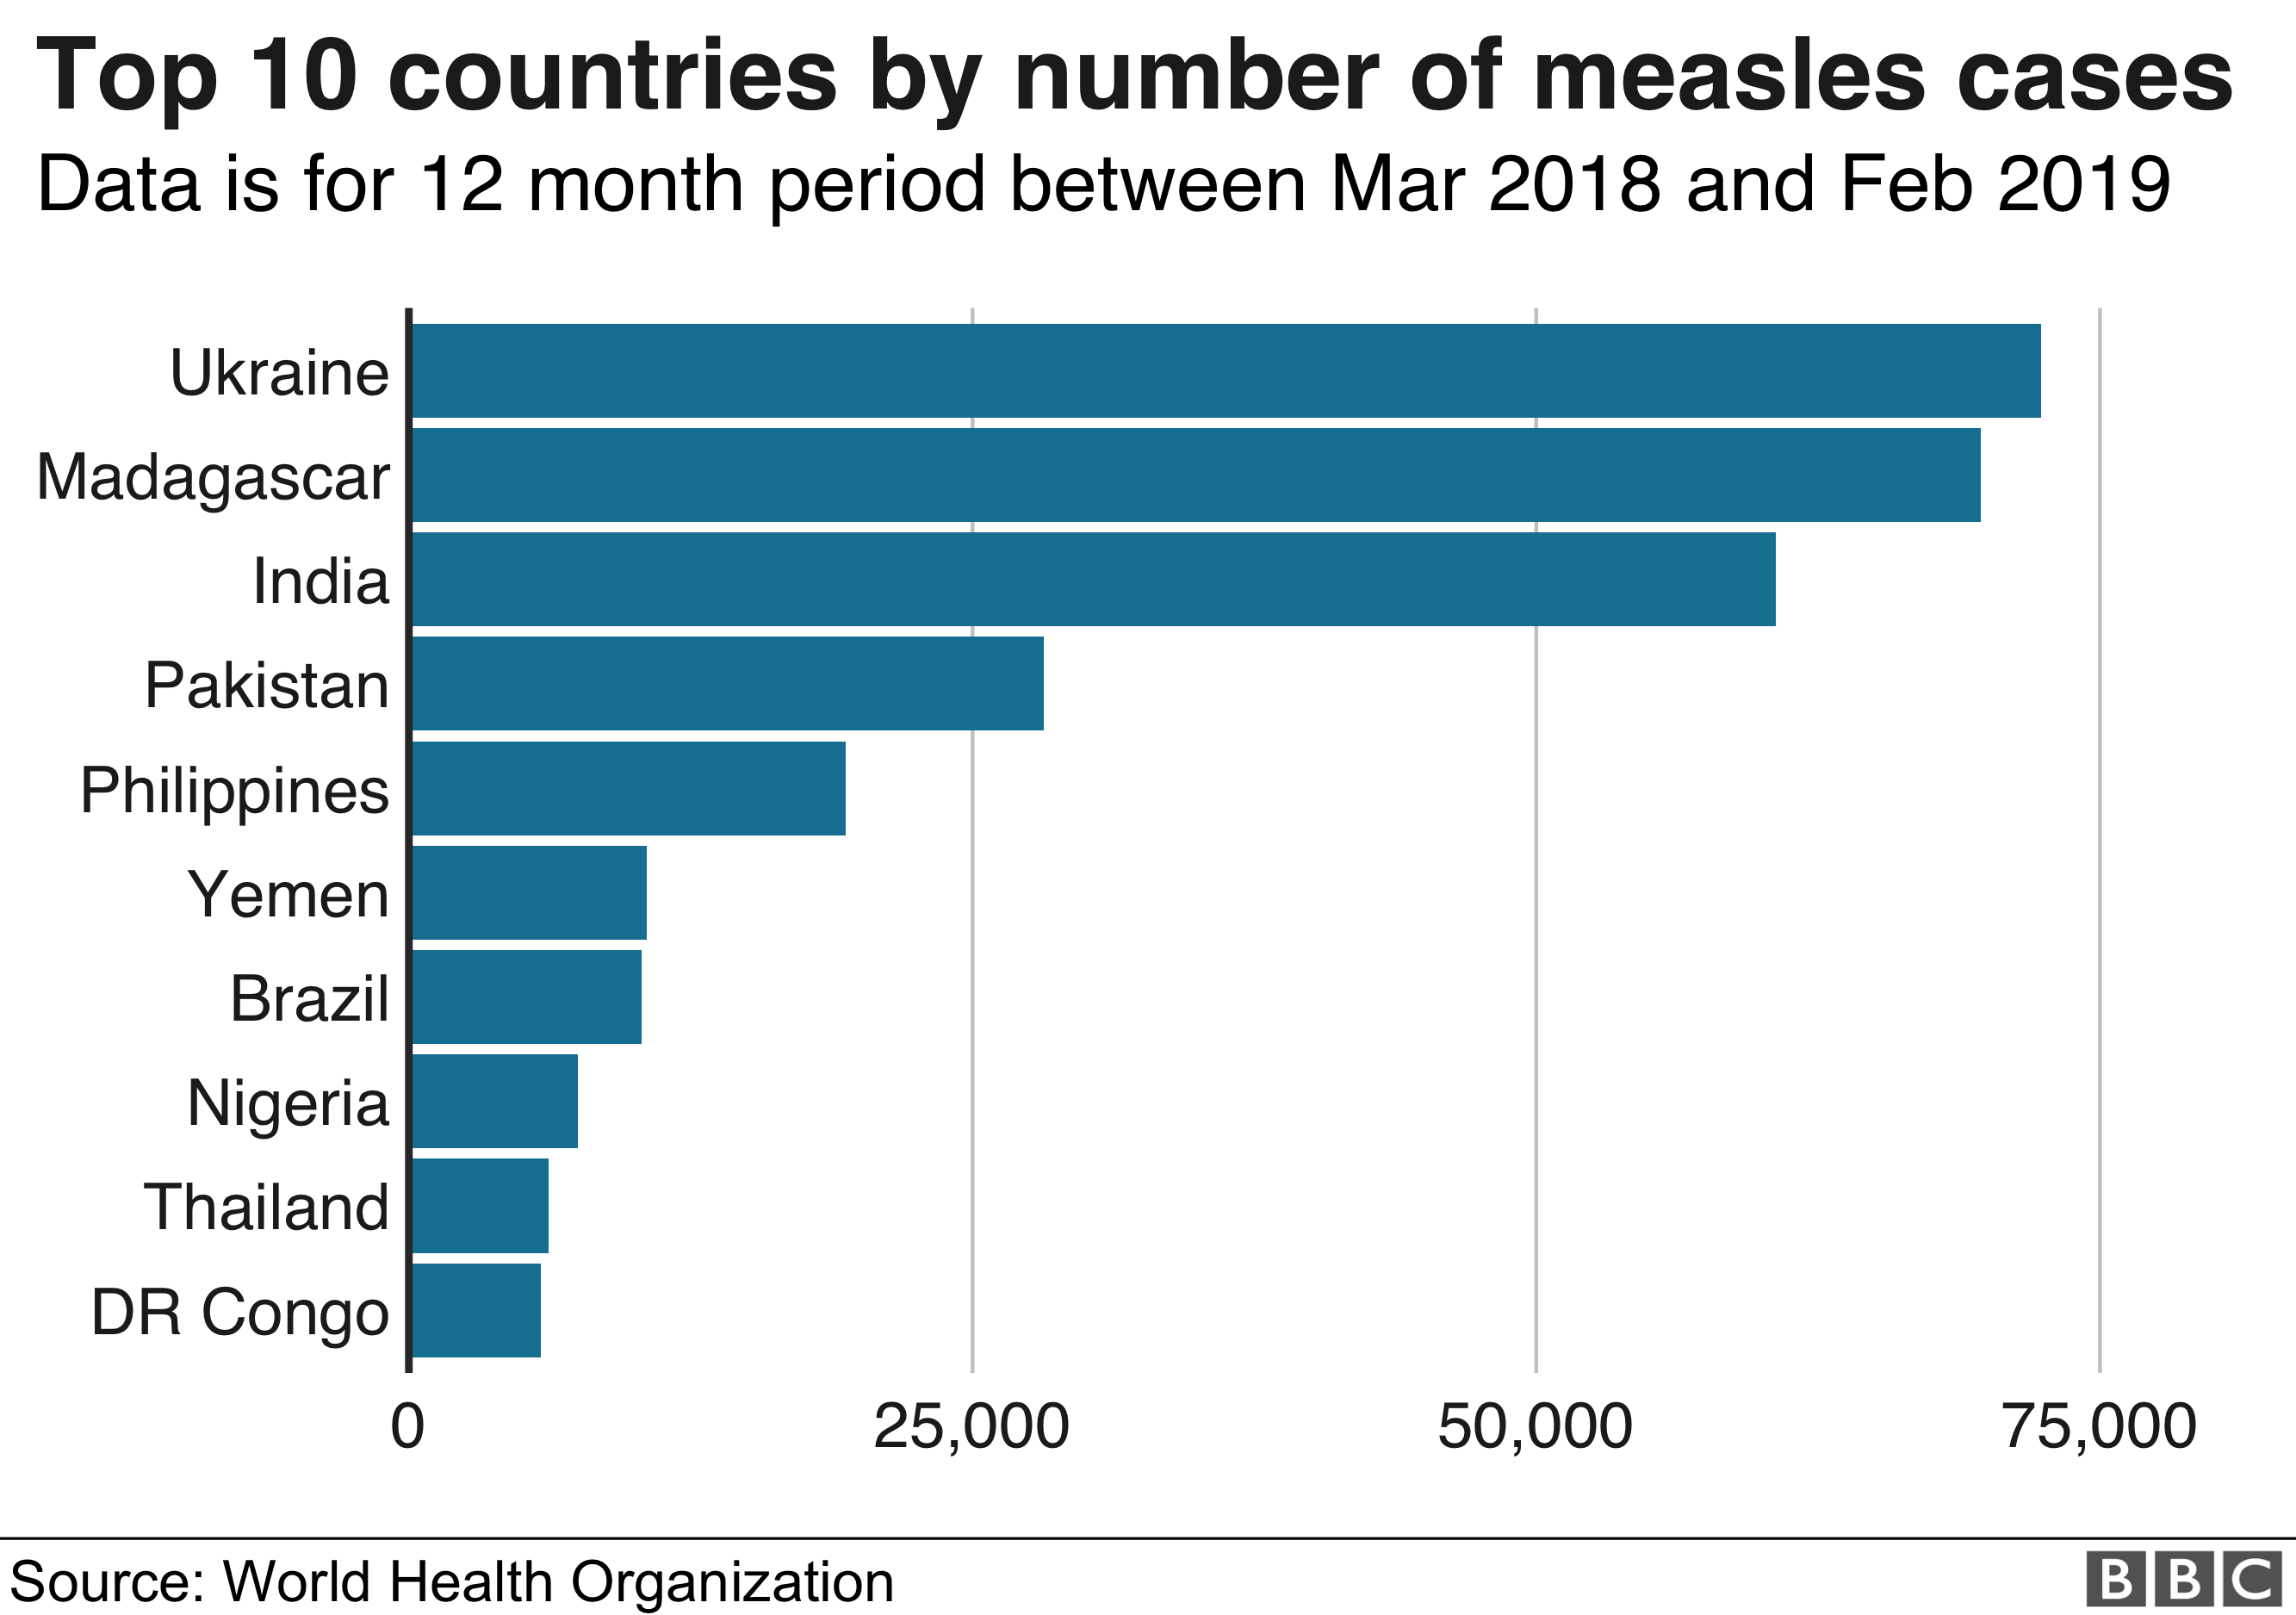 Chart showing the top 10 countries by number of measles cases